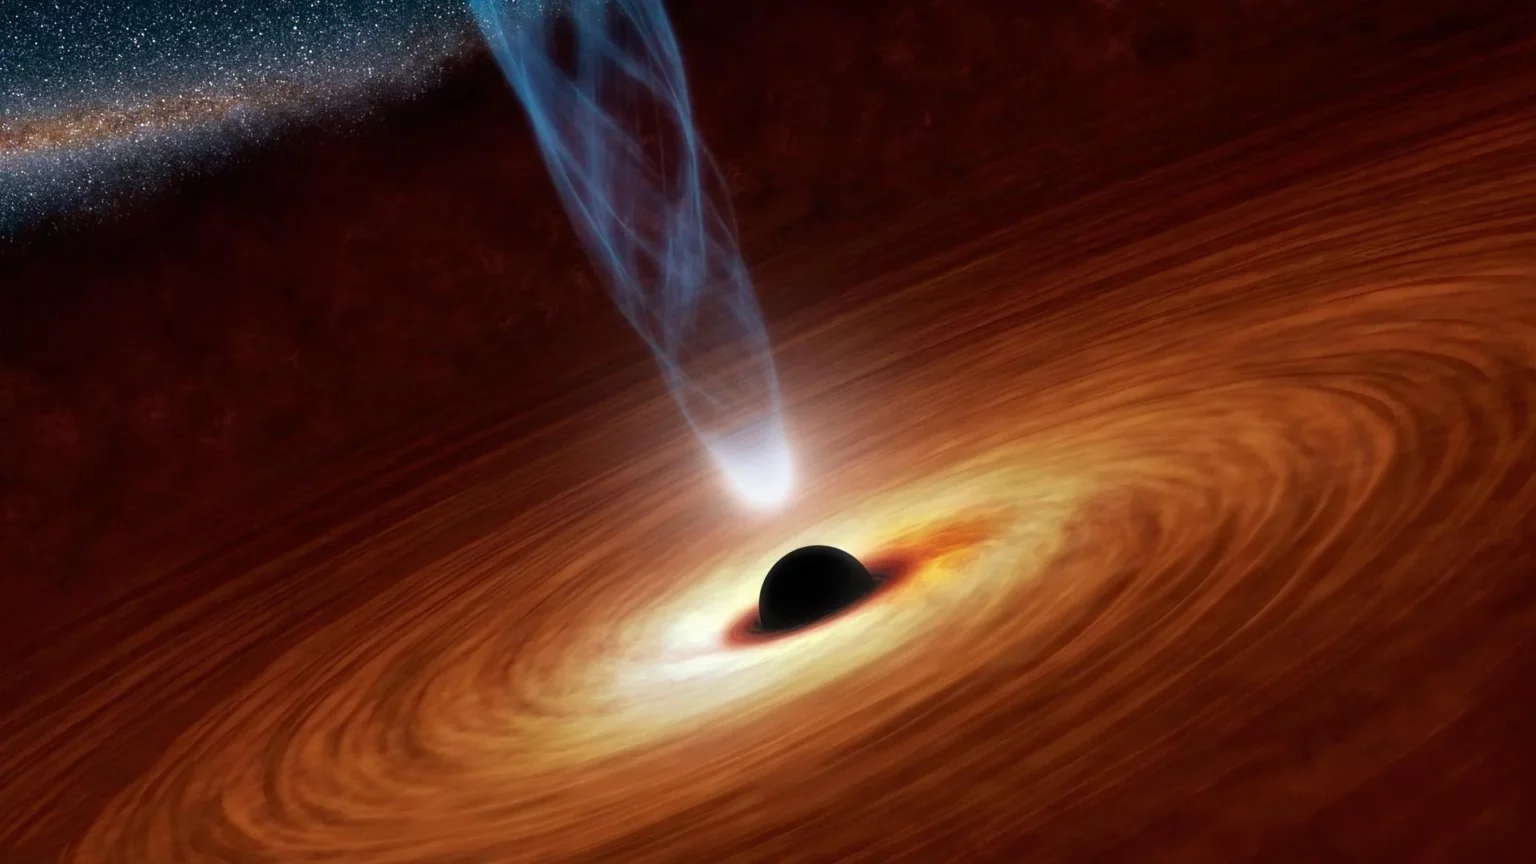 nasas-animated-tour-of-black-holes-from-tiny-to-supermassive-ones